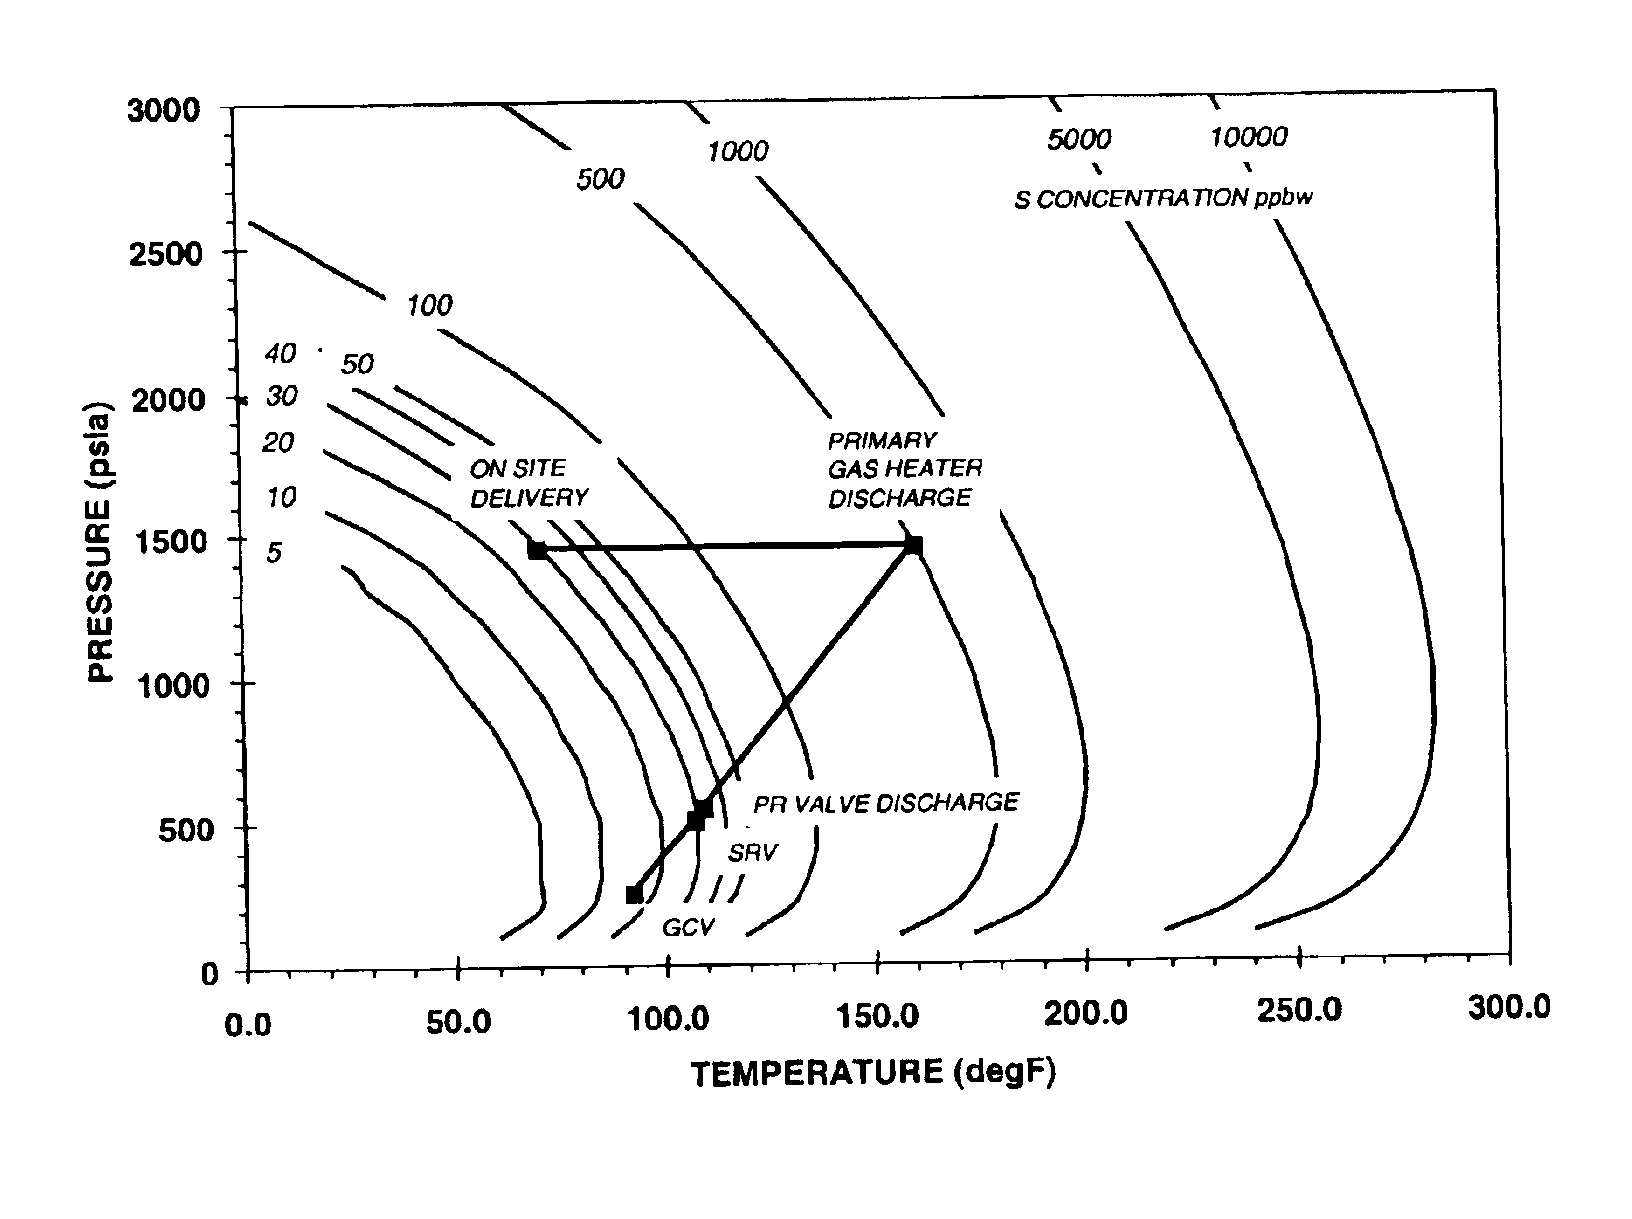 Sulfur deposition control method and related control algorithm